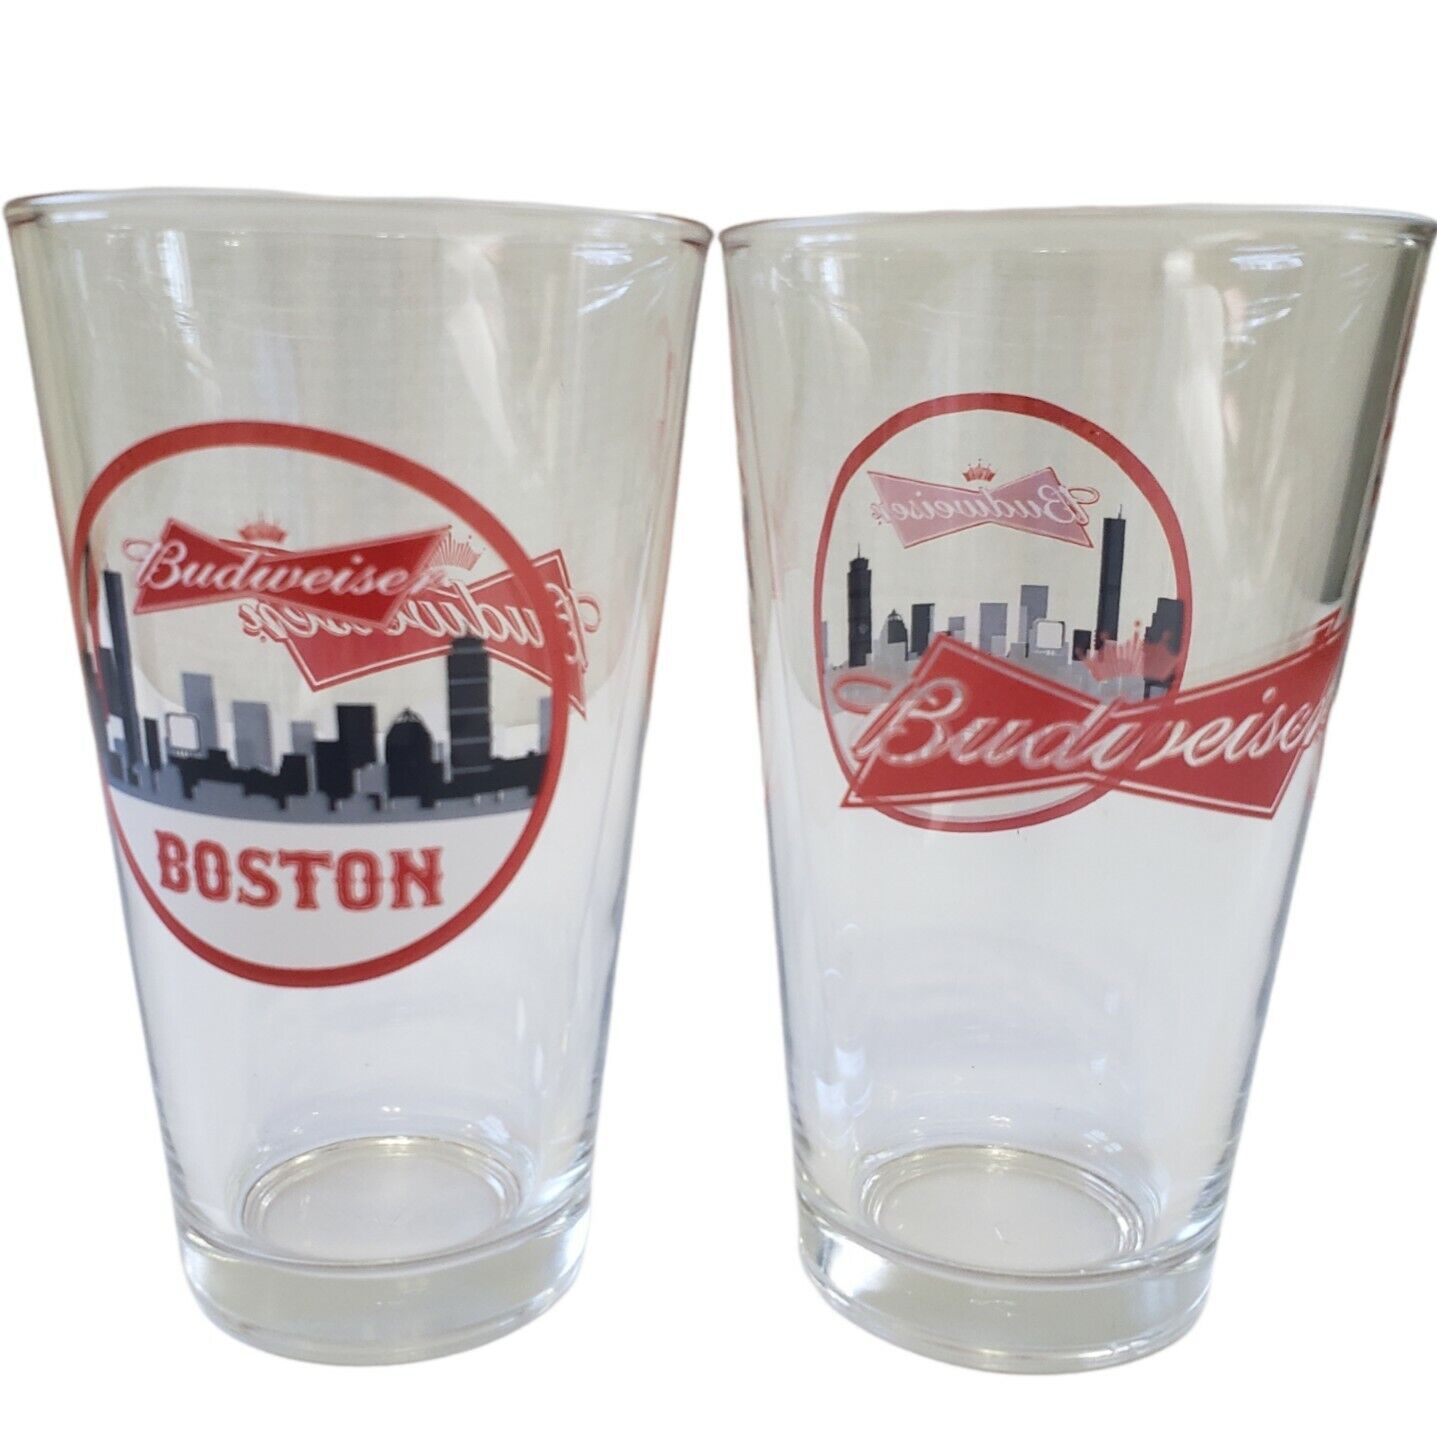 Budweiser Boston Pint Beer Clear Glasses Set Of Two Six Inches High 16 ounce New